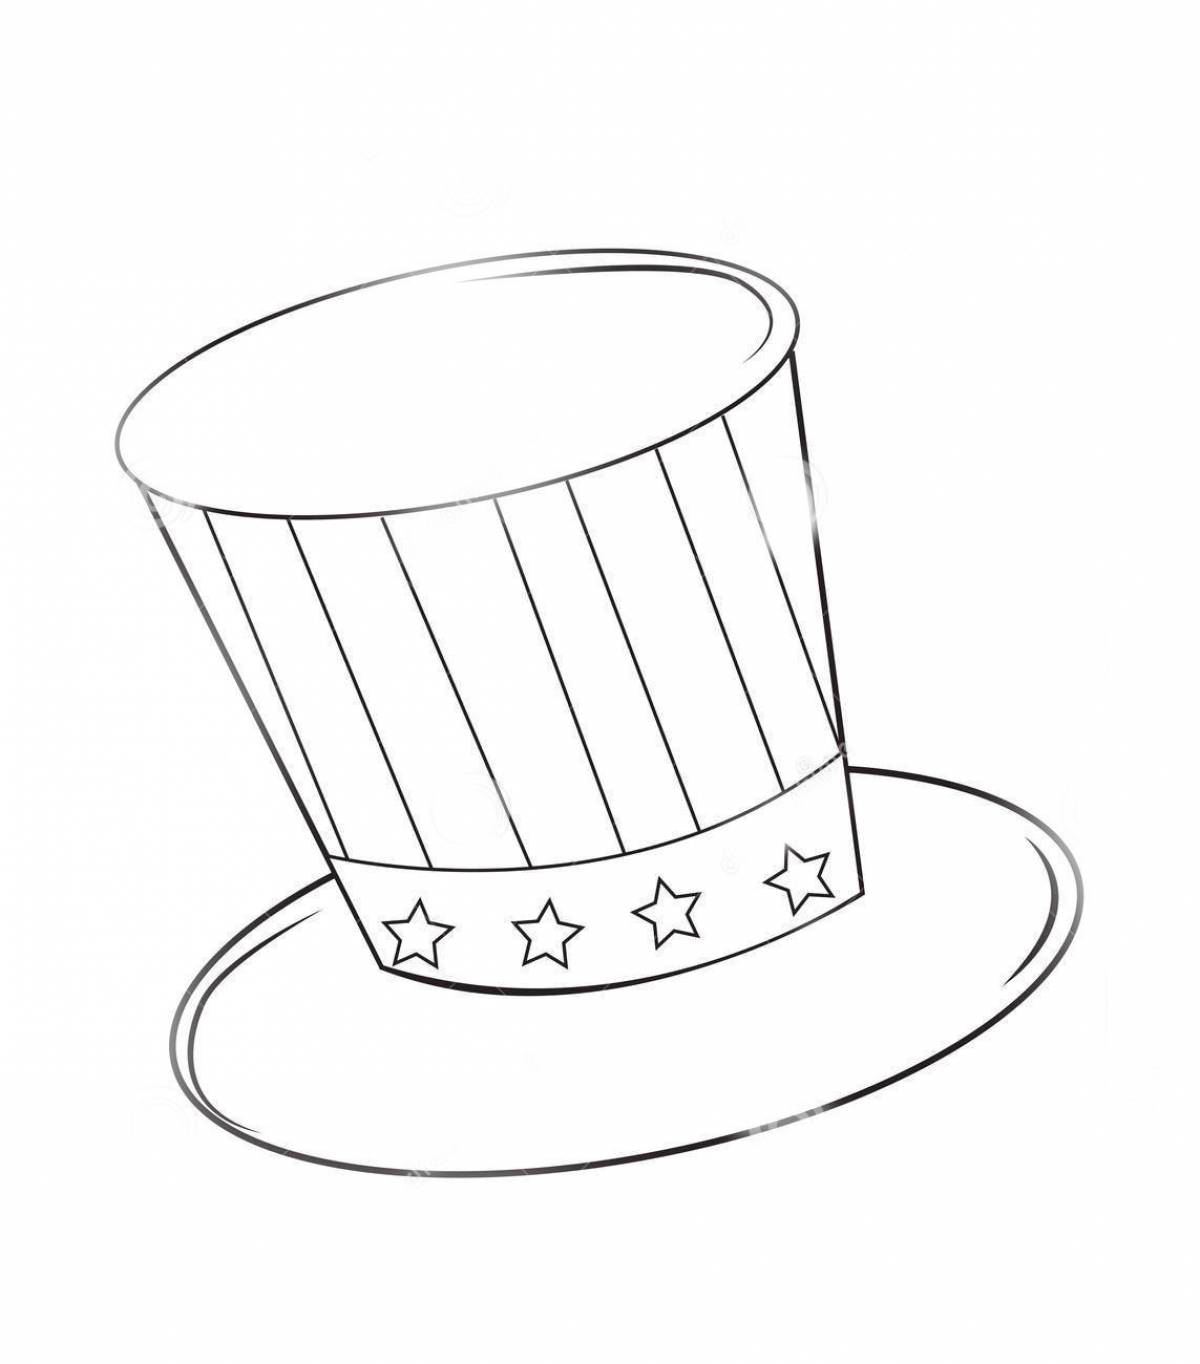 Cylinder coloring page